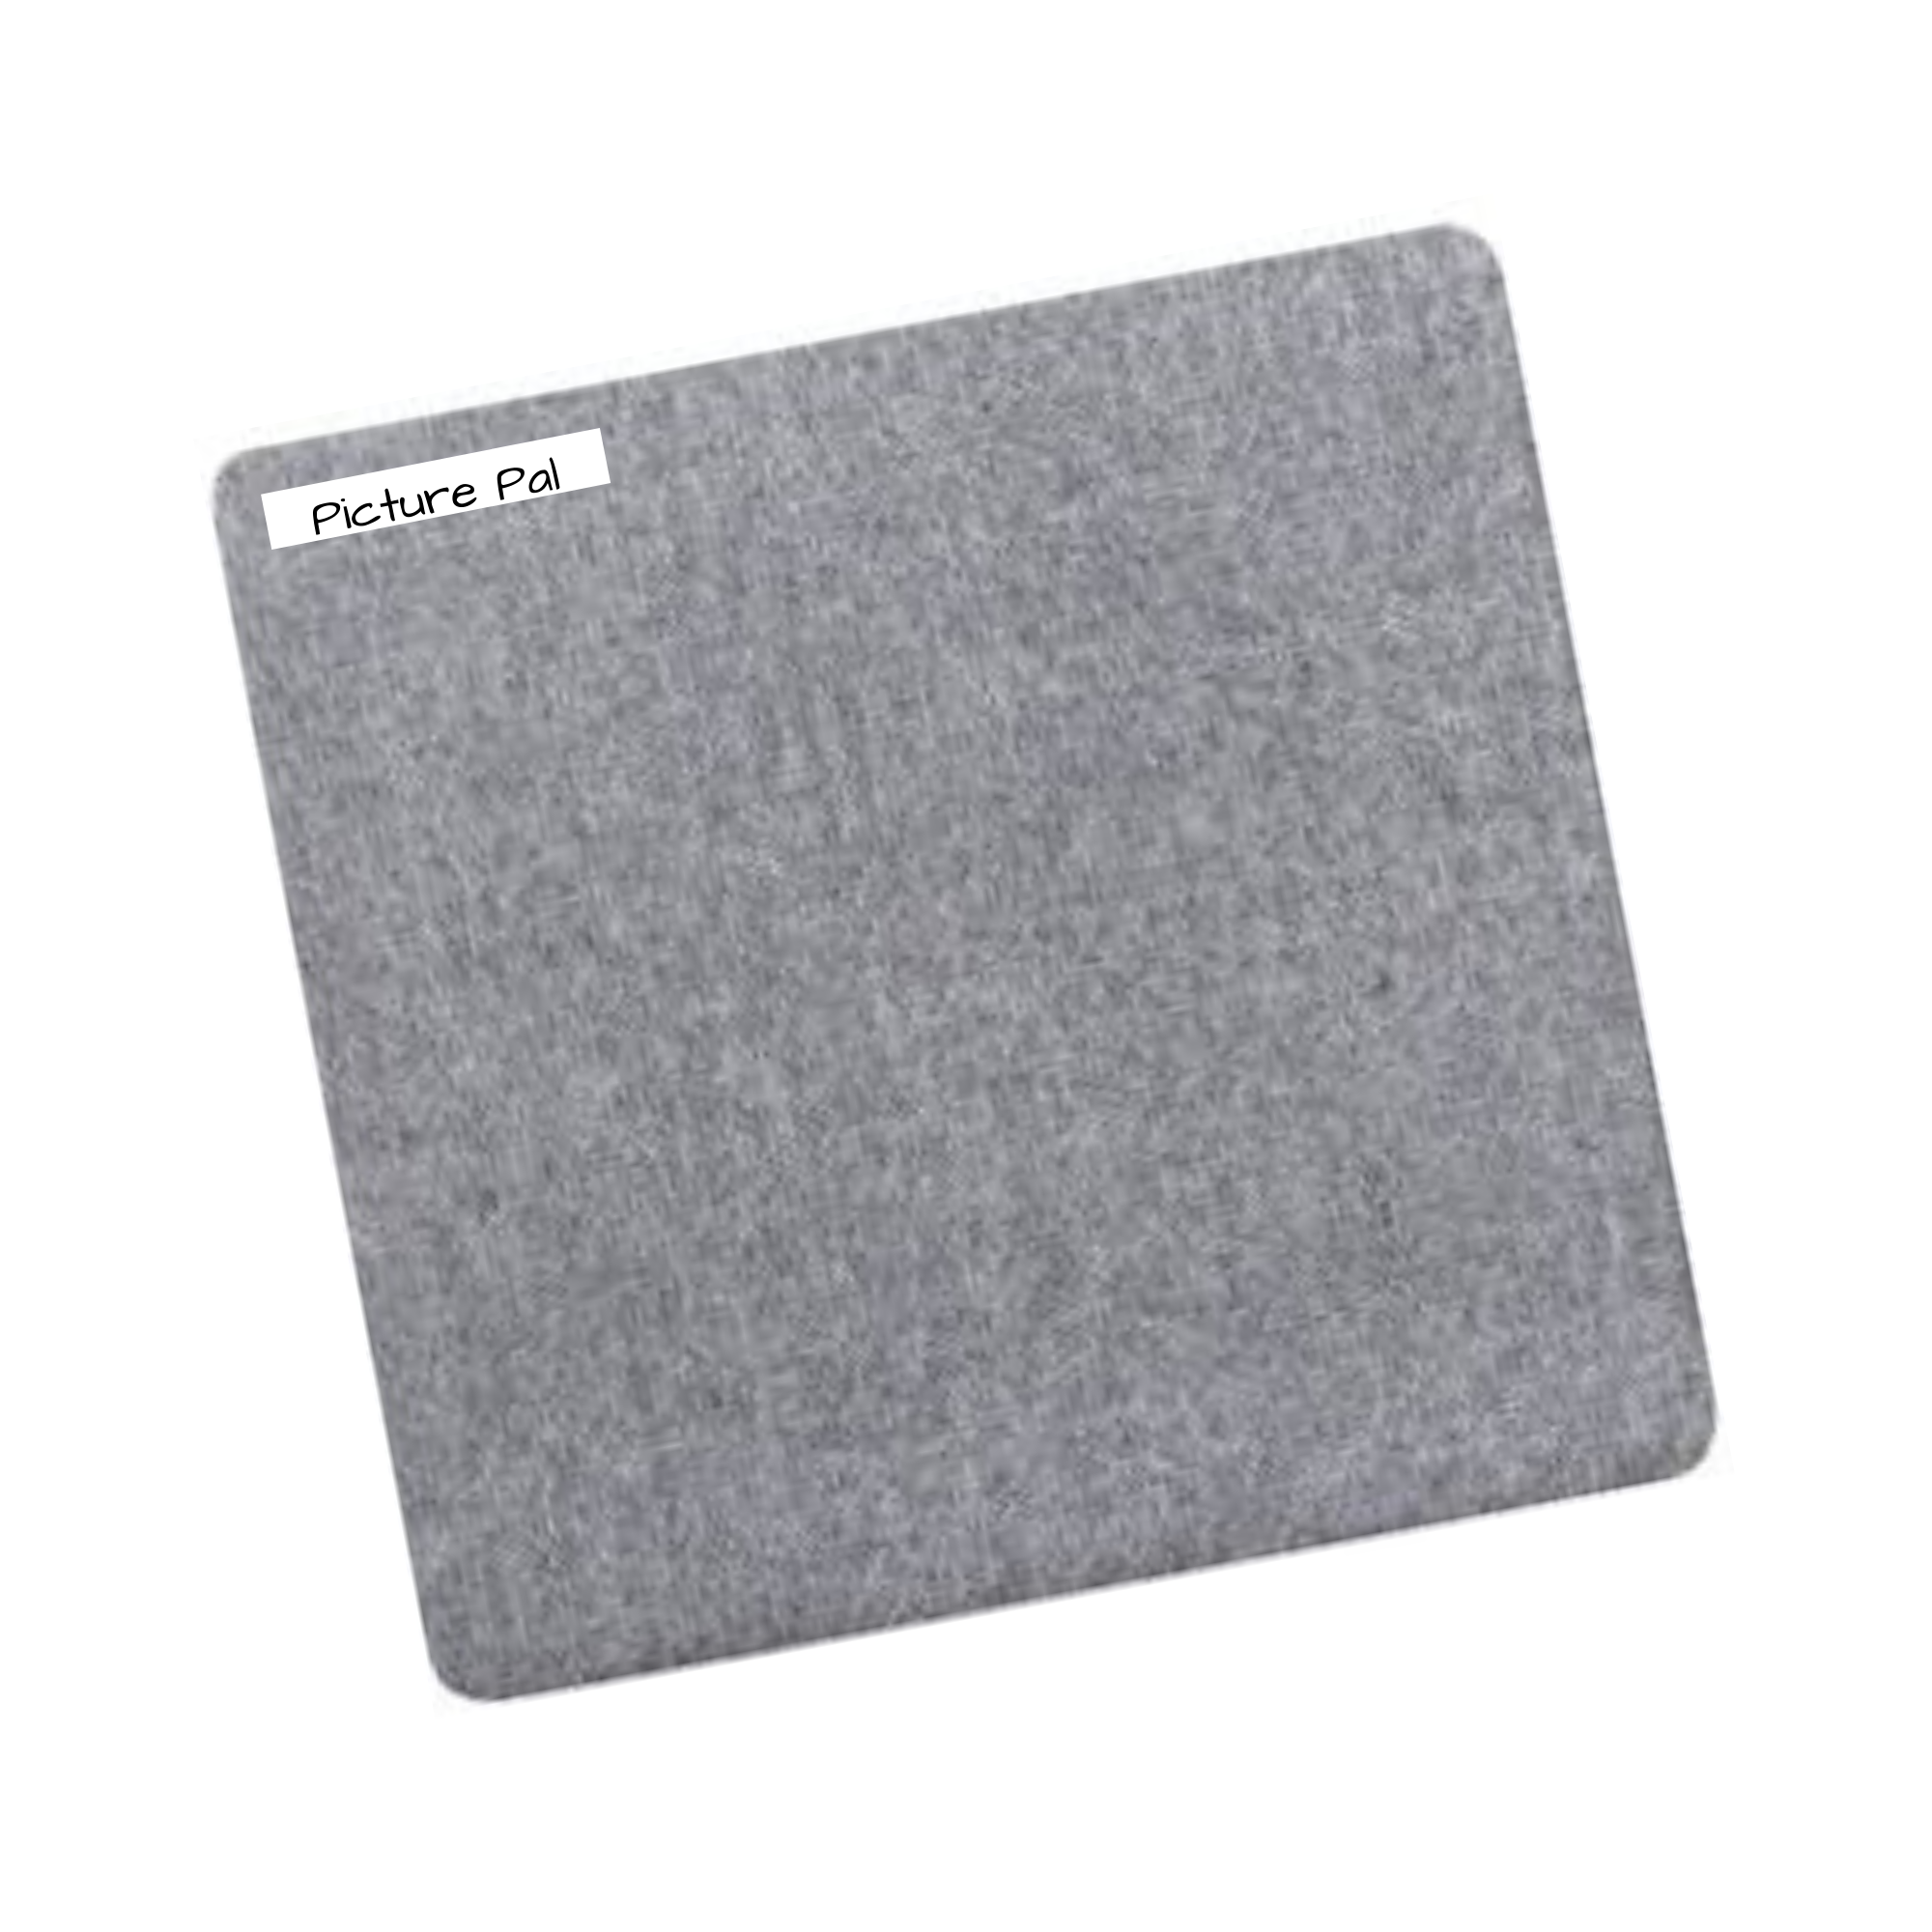 Picture Pal Sustainable 2d Needle Felting Pad - now in two sizes!